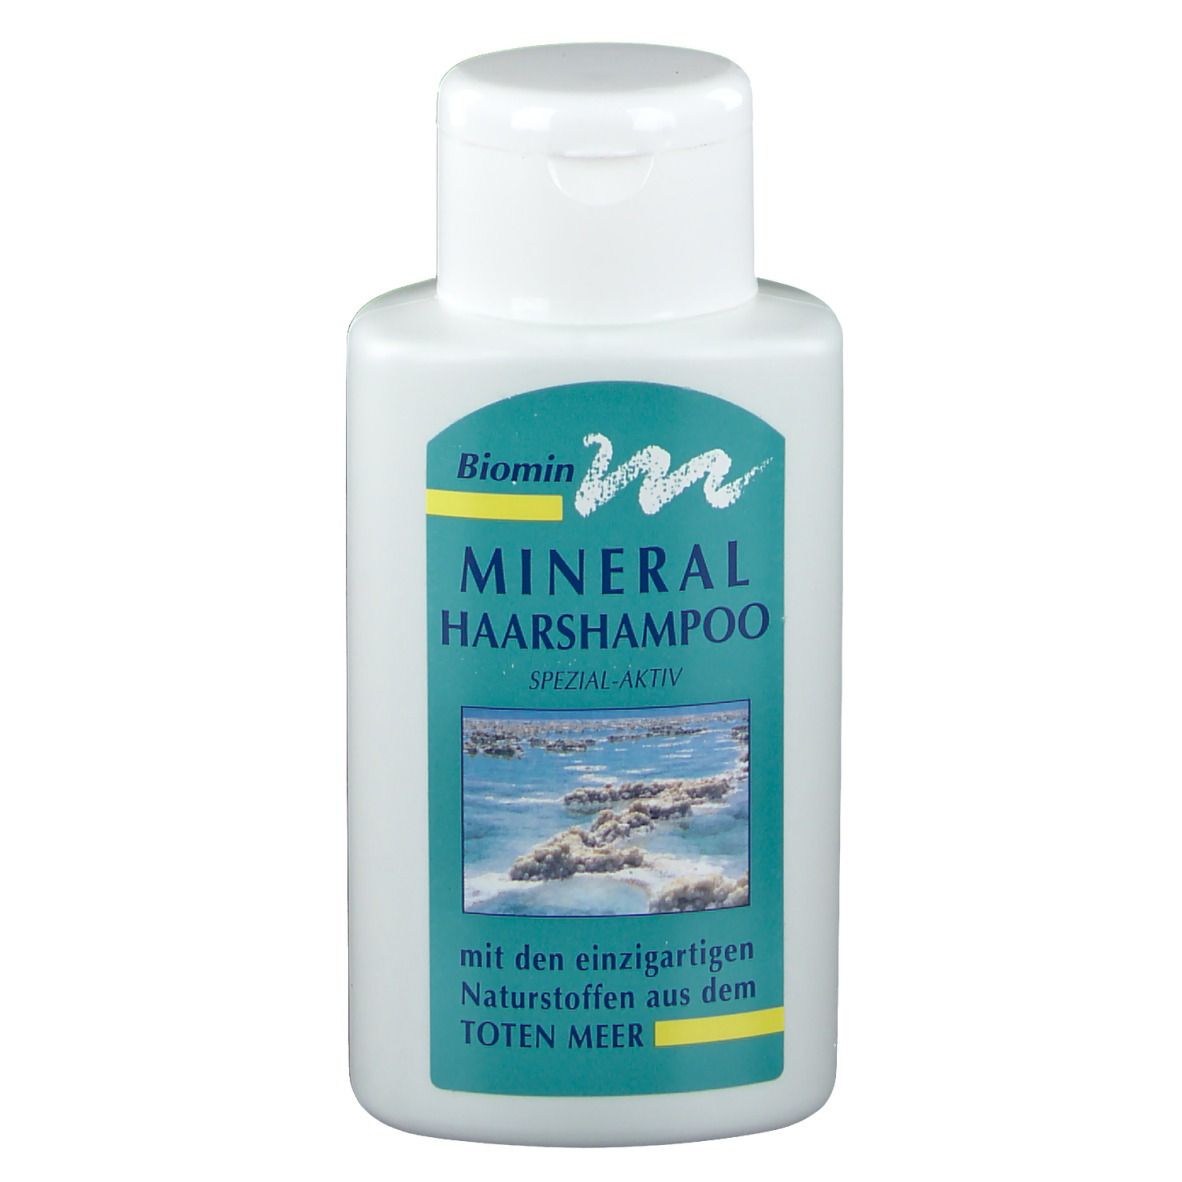 Image of Biomin Mineral Haarshampoo Spezial Aktiv